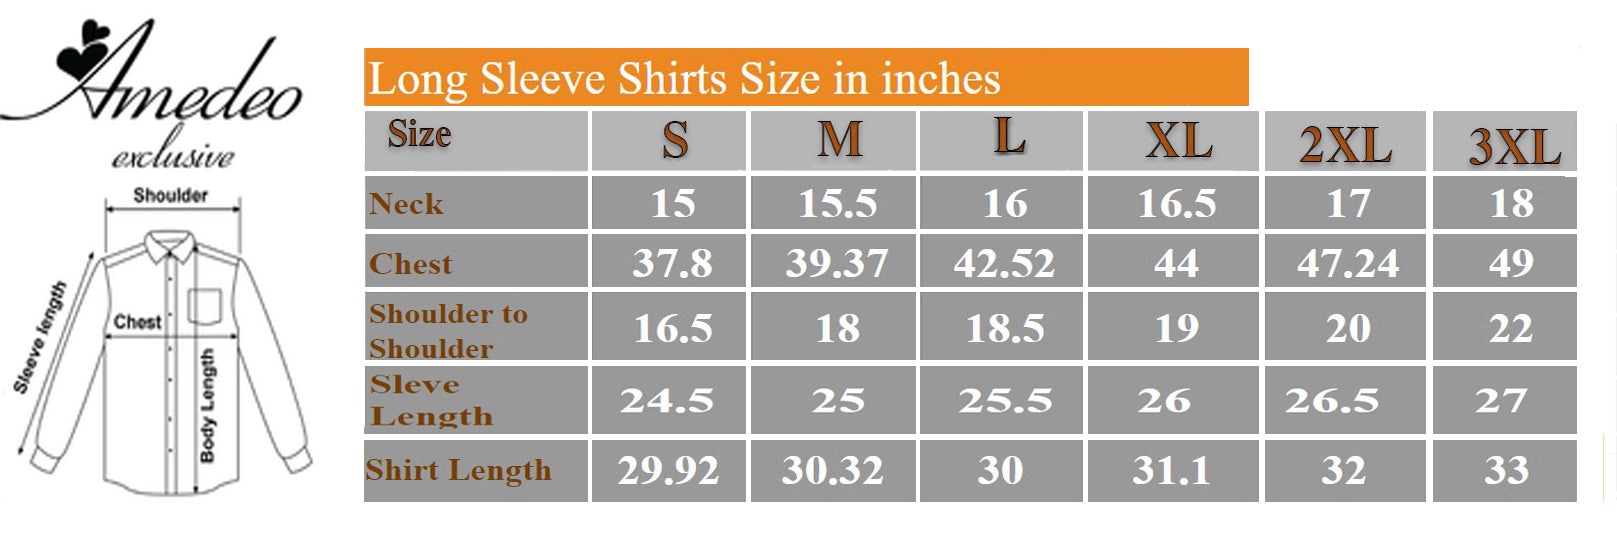 Solid Grey Mens Slim Fit Designer Dress Shirt - tailored Cotton Shirts for Work and Casual Wear - Amedeo Exclusive